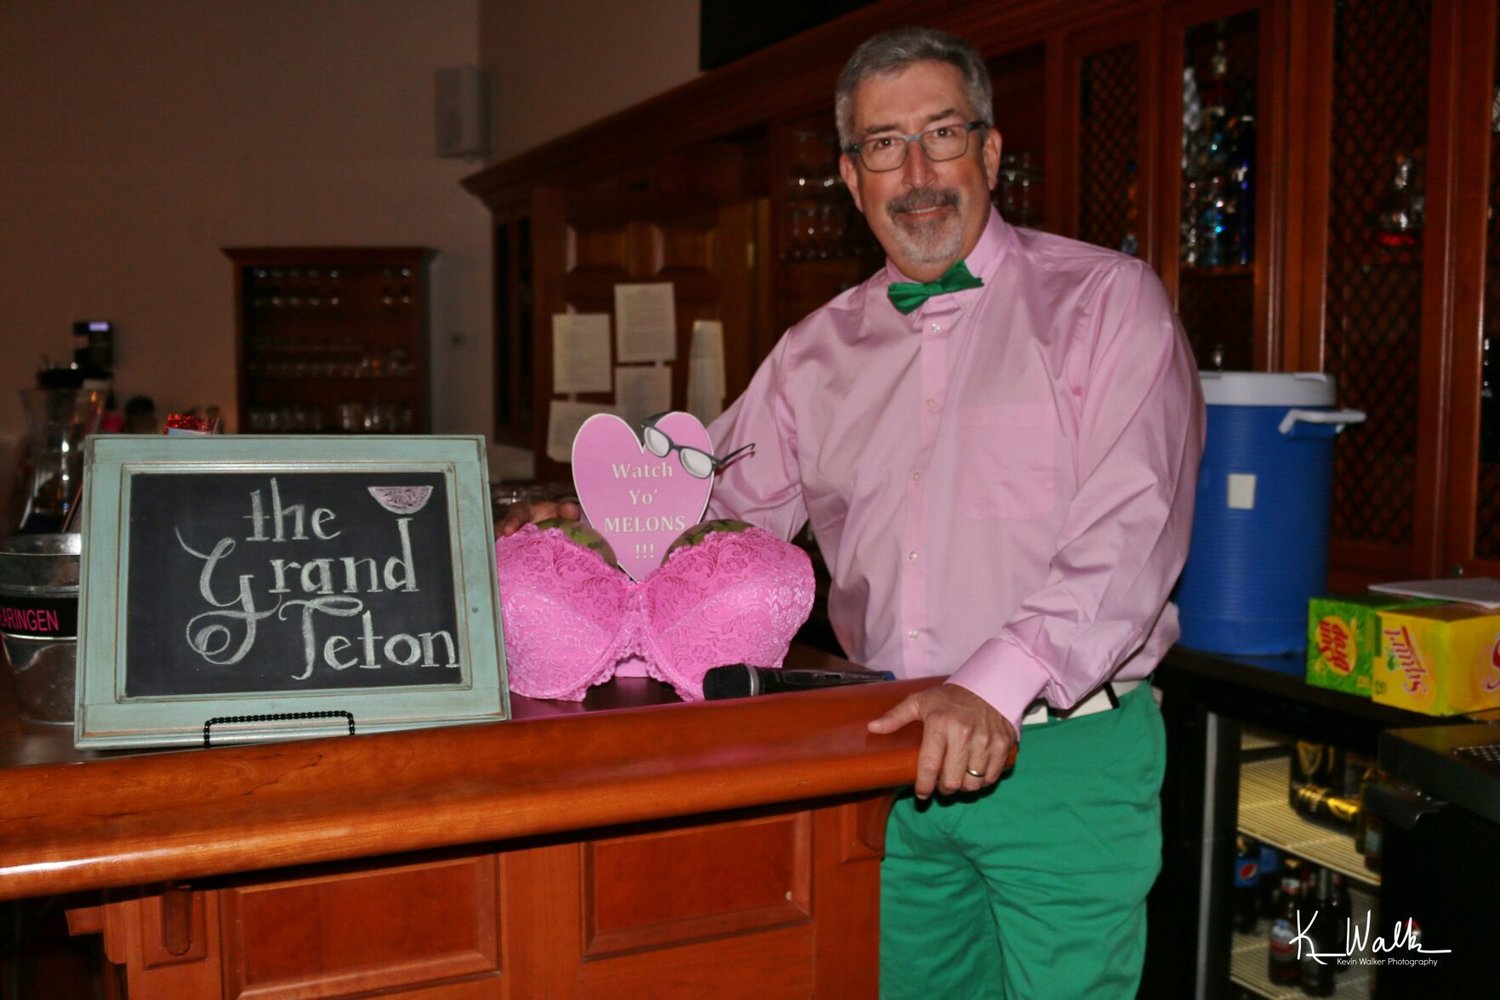 Stafford Swearingen was the first to volunteer for the Bothwell Foundation’s first Celebrity Bartender event in 2017 with a unique drink entry and clothing to match.